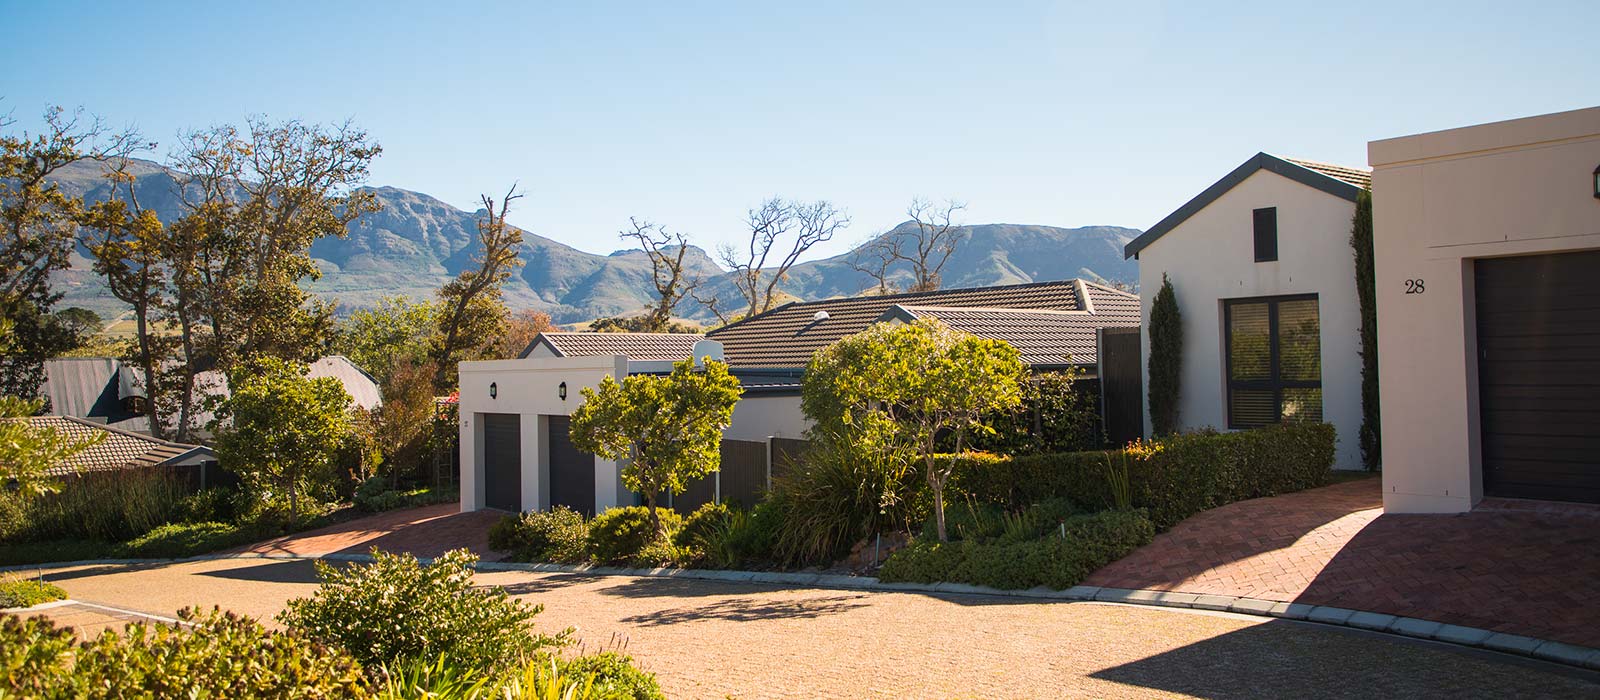 Home to a vibrant community of active and dynamic retirees, Evergreen Bergvliet is one of our most exclusive villages.